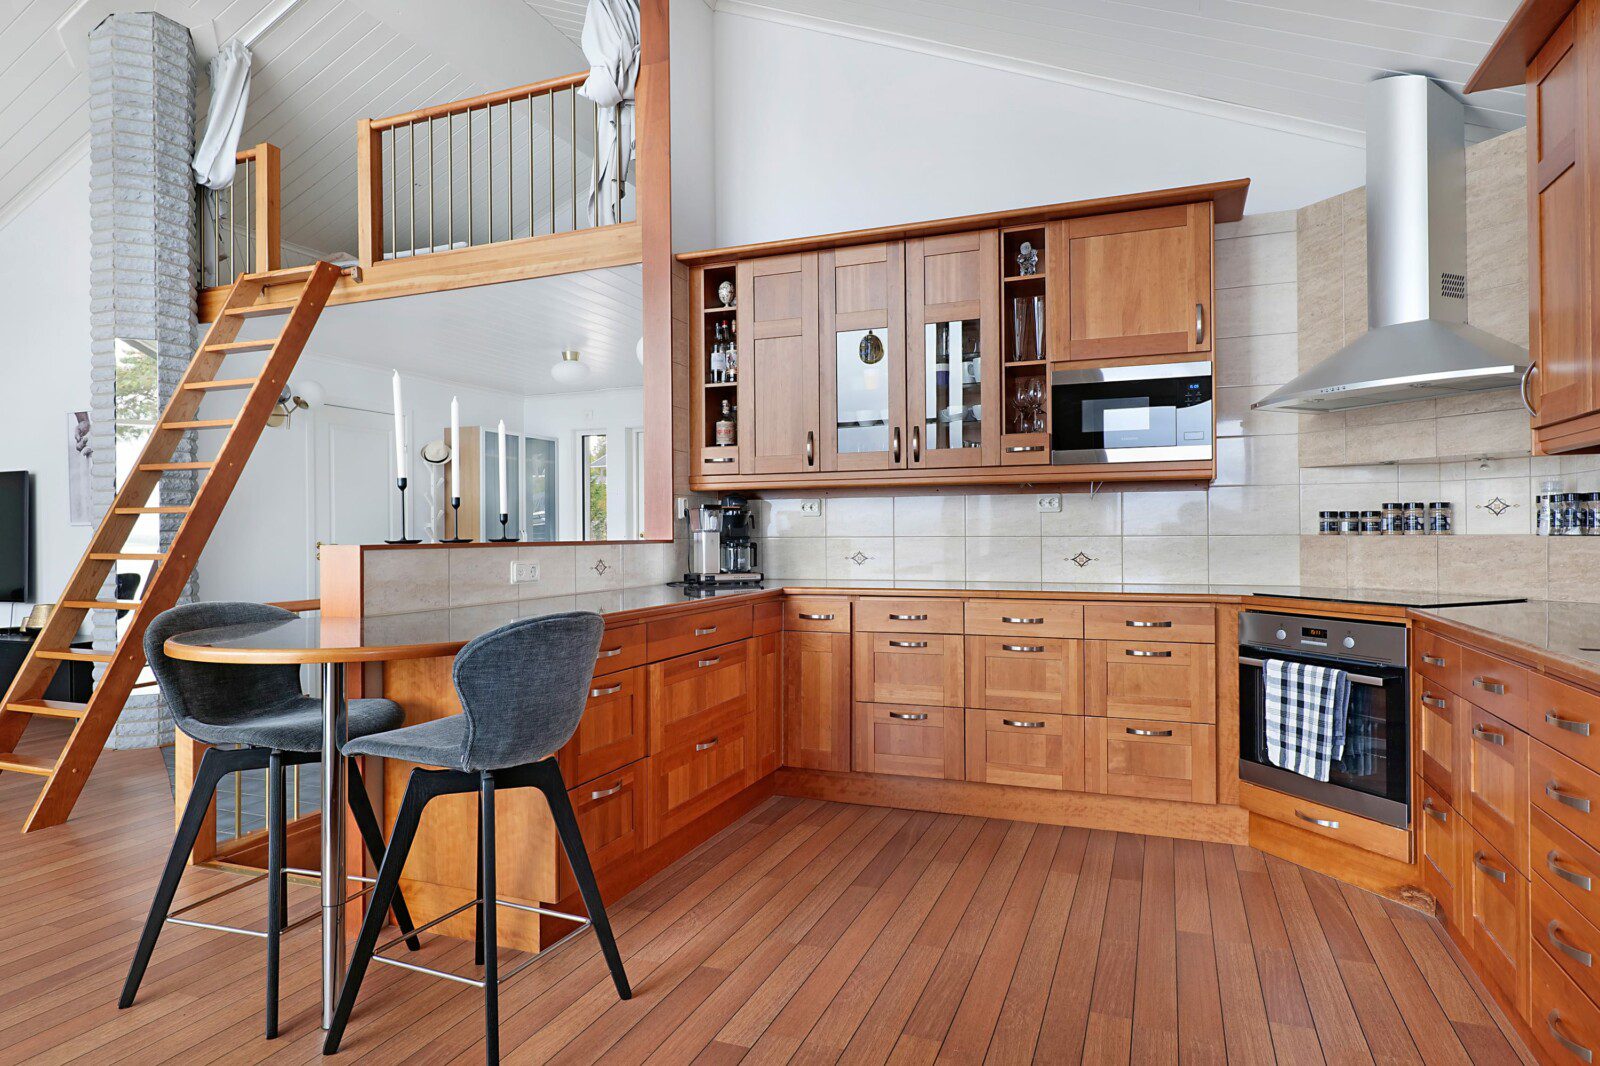 Fully equipped kitchen in a northern Sweden home rental